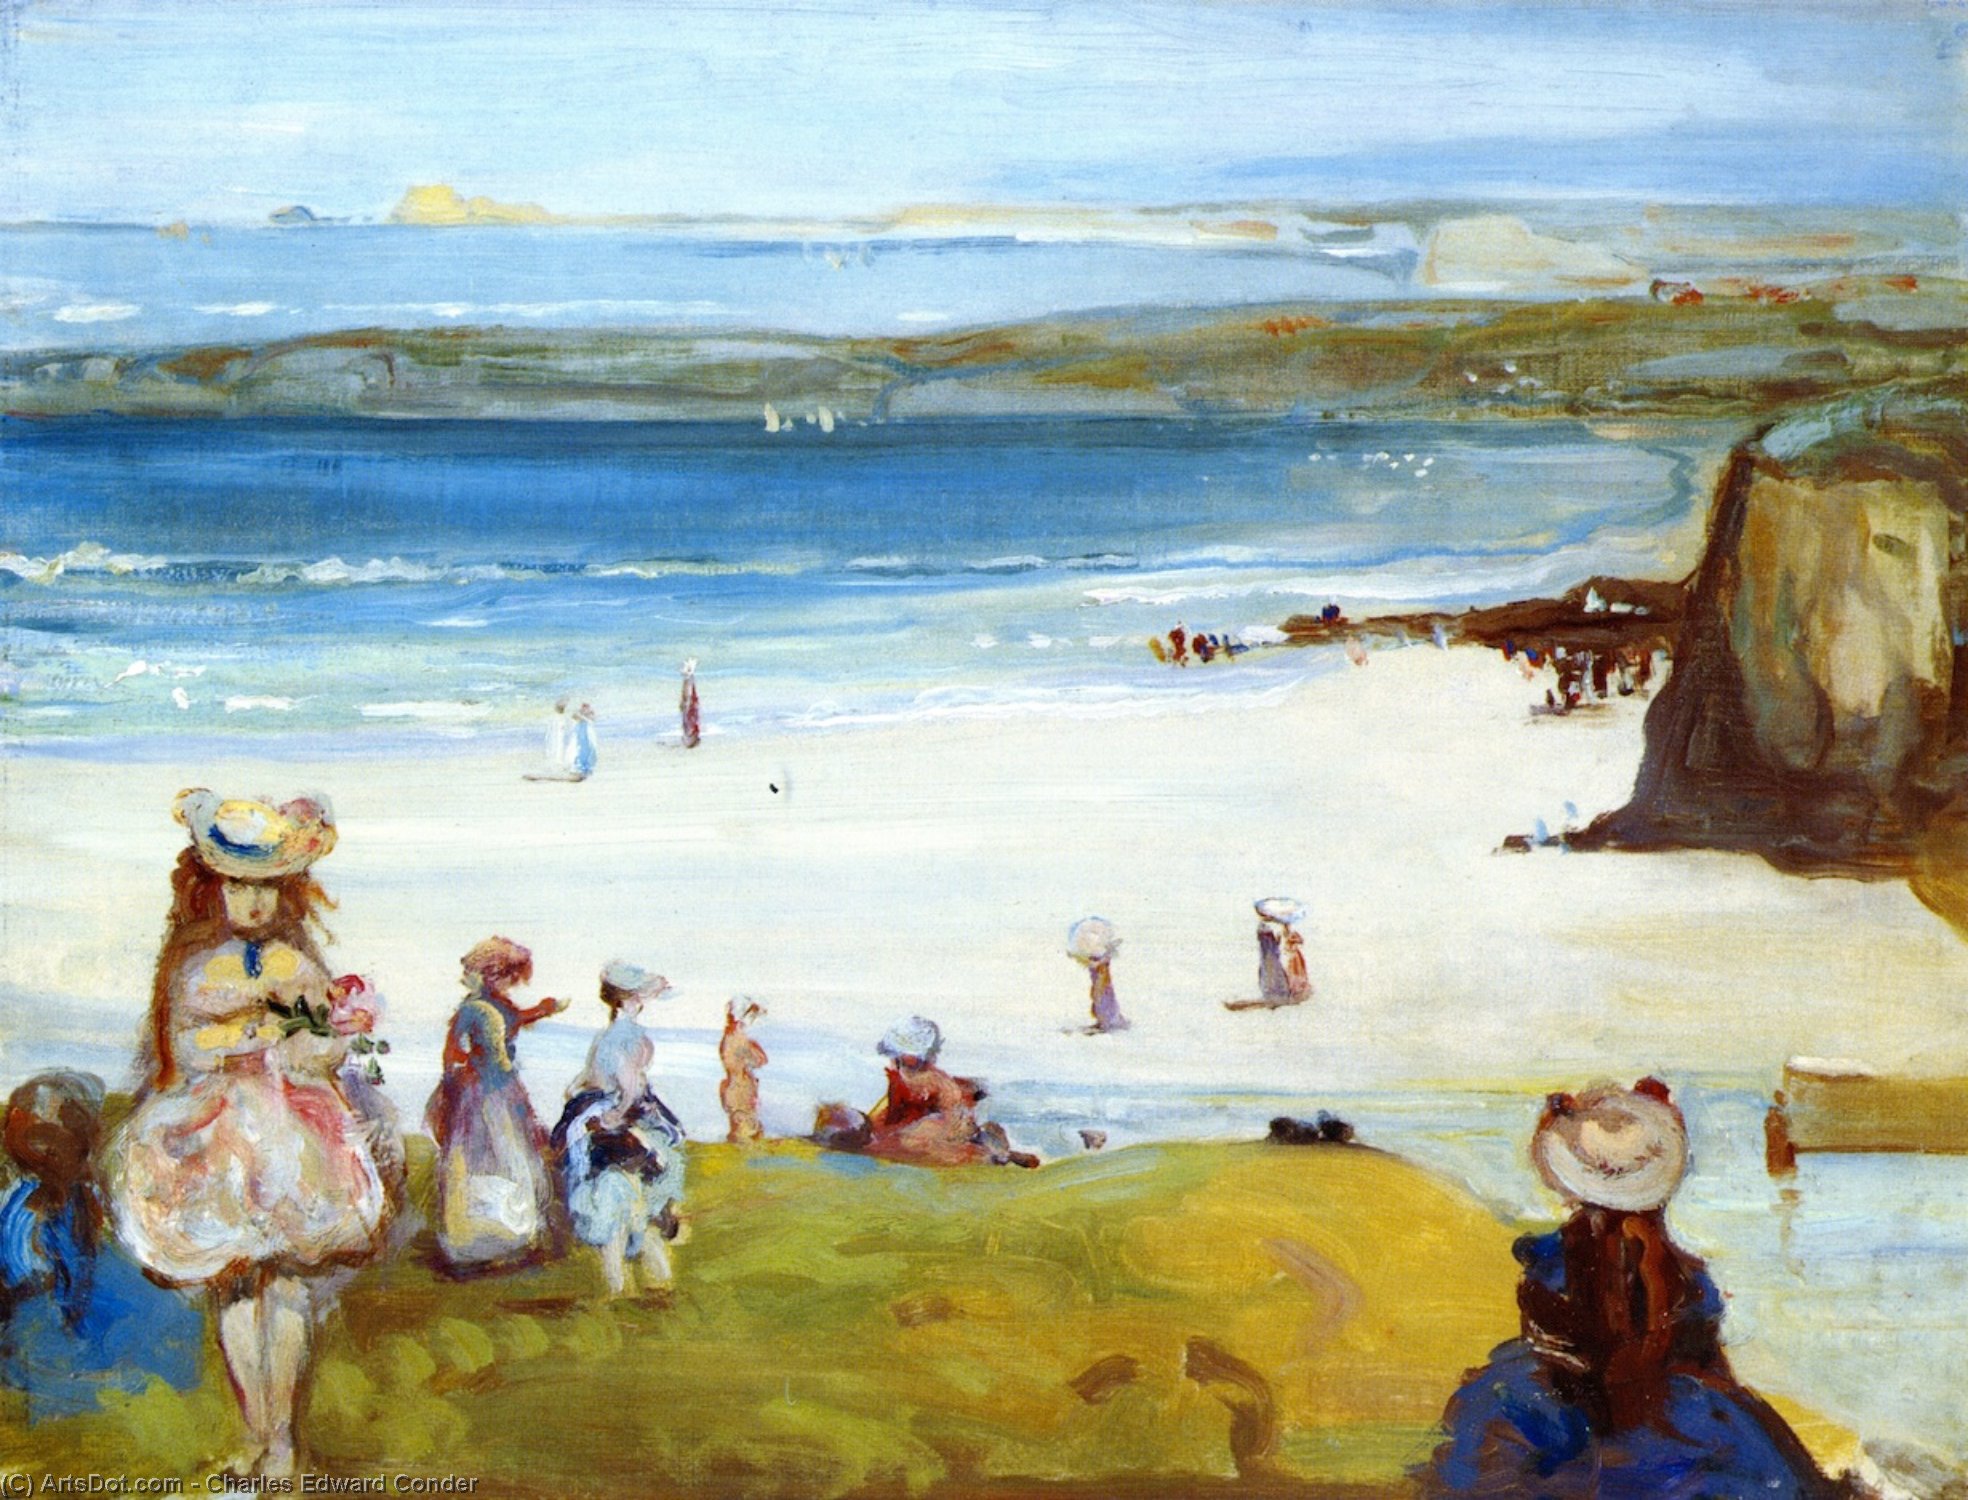 Order Paintings Reproductions The Sands, Newquay, 1906 by Charles Edward Conder (1868-1909, United Kingdom) | ArtsDot.com